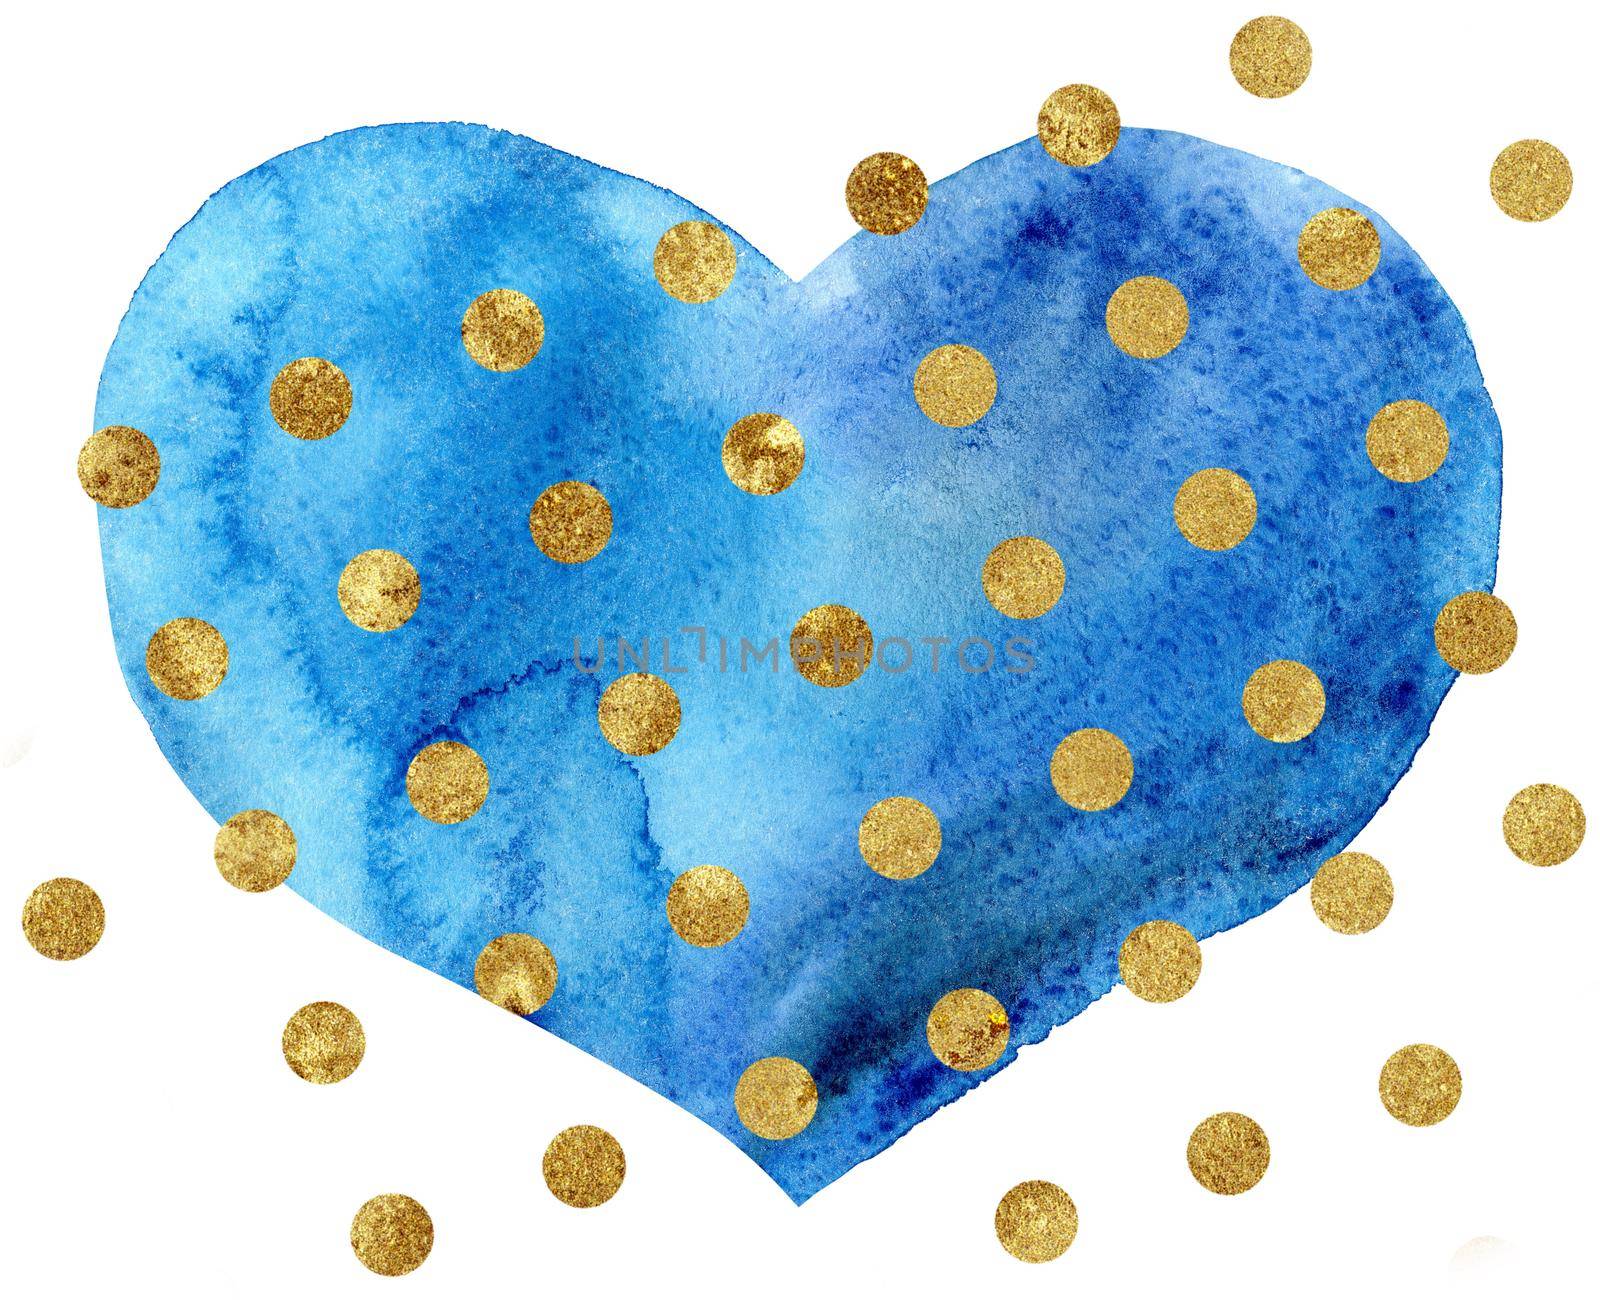 Watercolor blue heart with gold dots on white background by NataOmsk